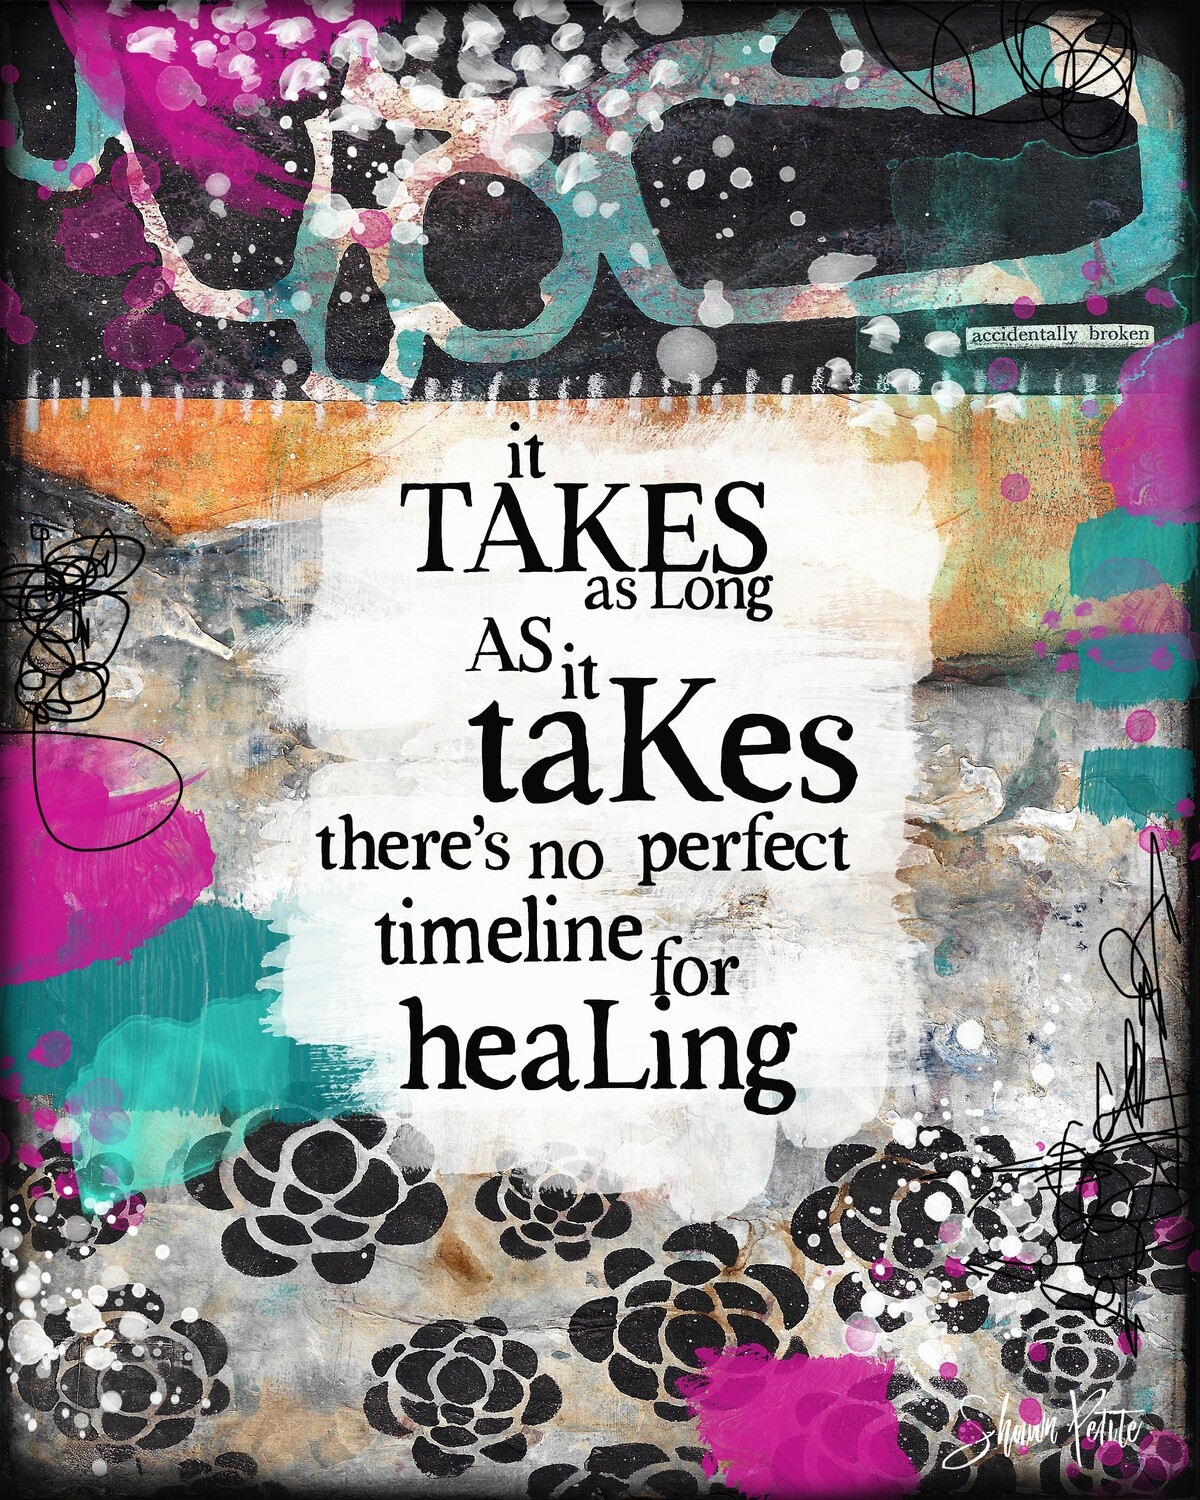 "It takes as long as it takes for healing" digital instant download